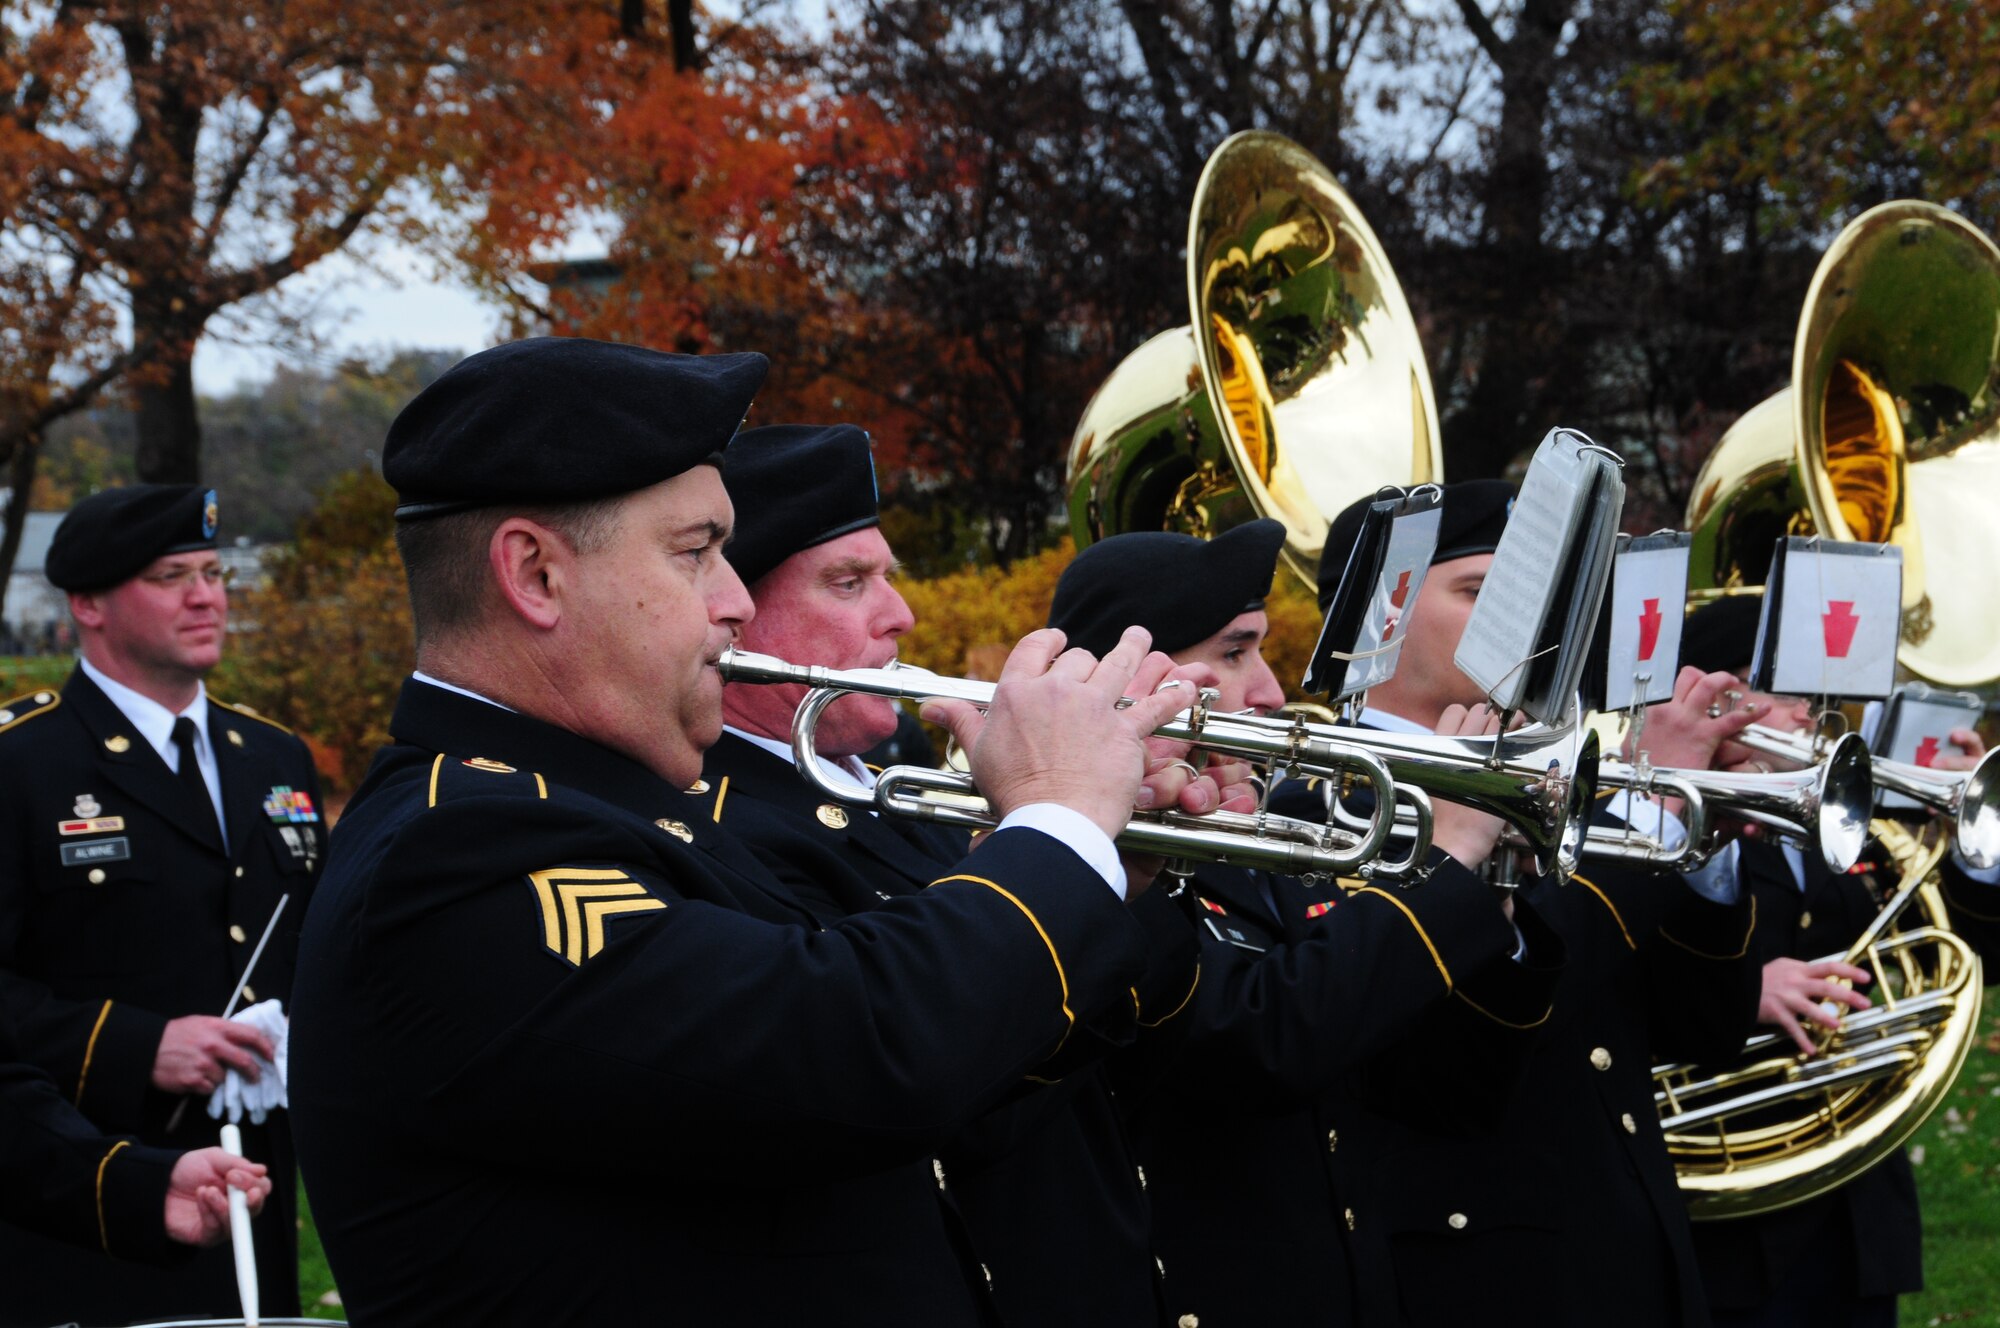 The Pennsylvania National Guard joined with the Pennsylvania Department of Conservation of Natural Resources' Point State Park and the Association of the United States Army to organize Steel City Salutes the Troops, Pittsburgh, November 8. 2014.  The event is a celebration of the region’s military history, community impact and continued relevance. (U.S. Air National Guard photo by Airman 1st Class Allyson Manners/ Released)